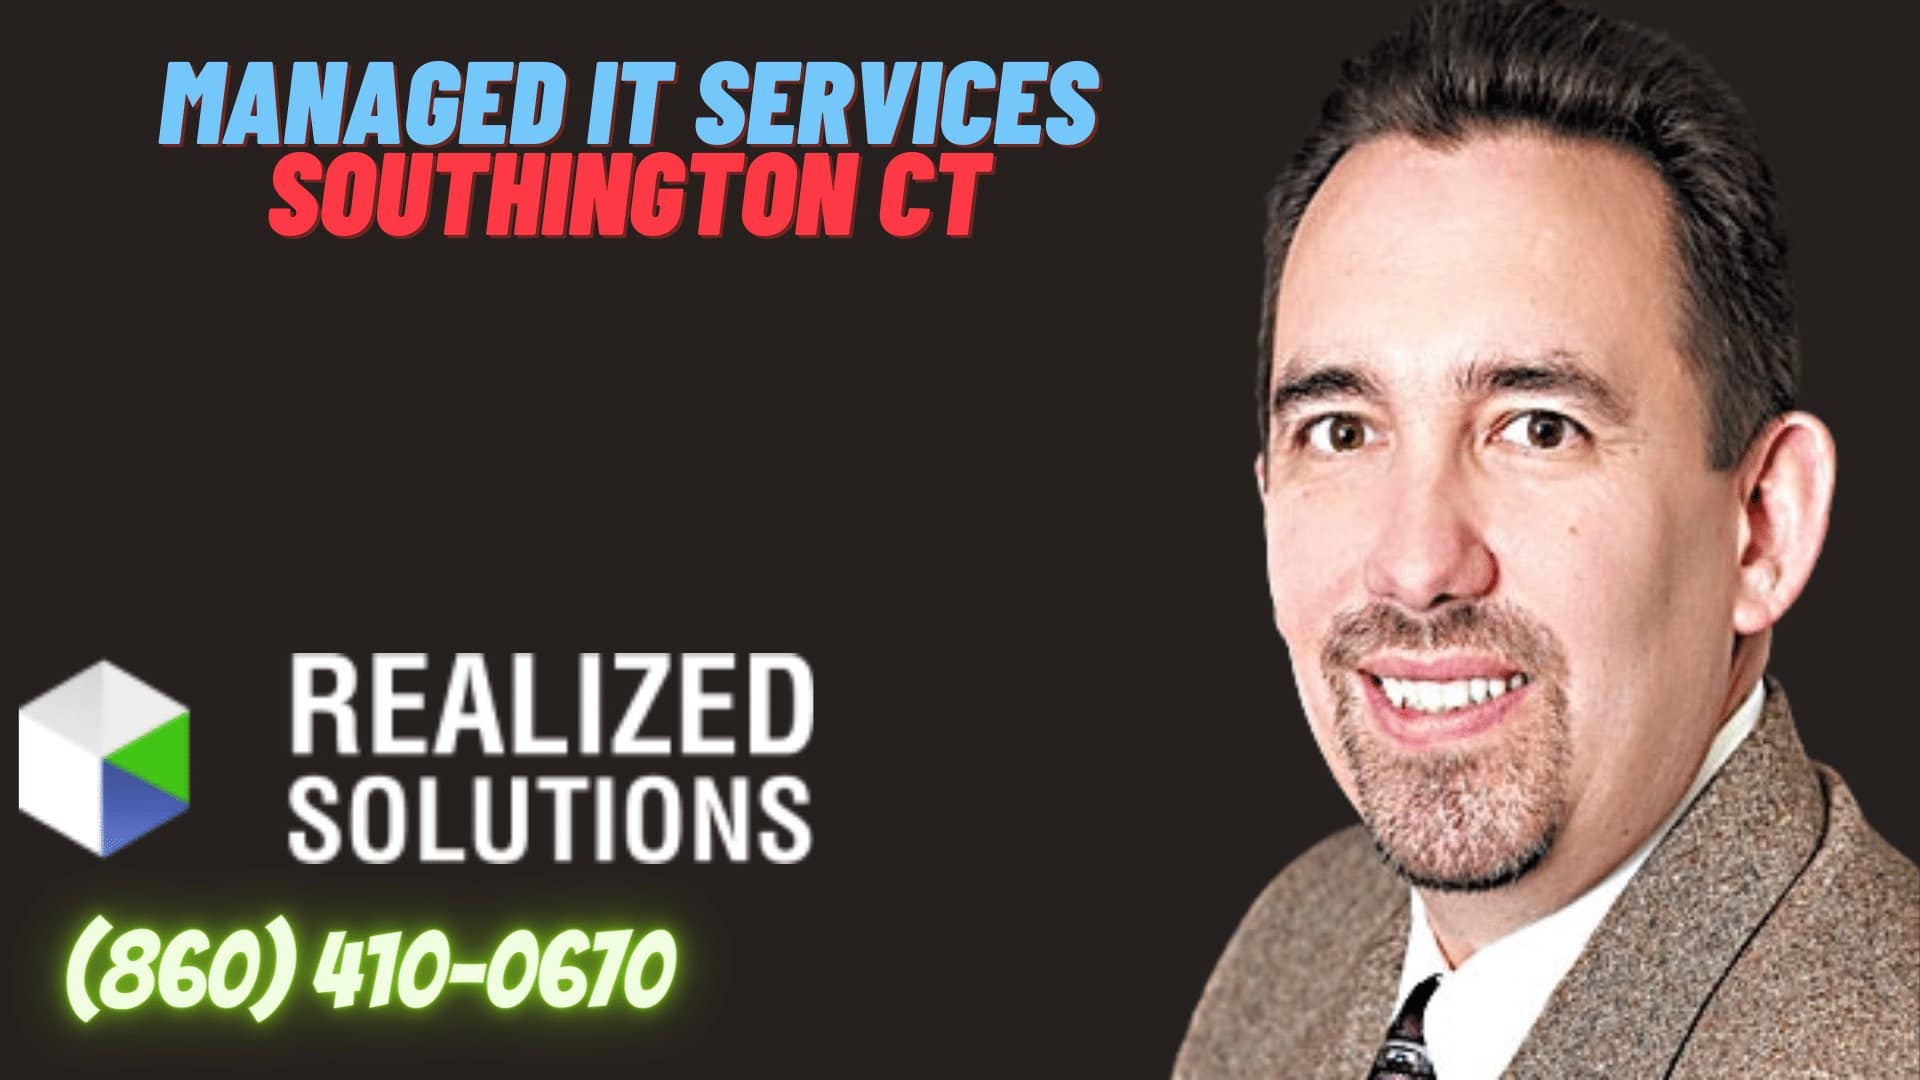 Managed IT Services Southington CT